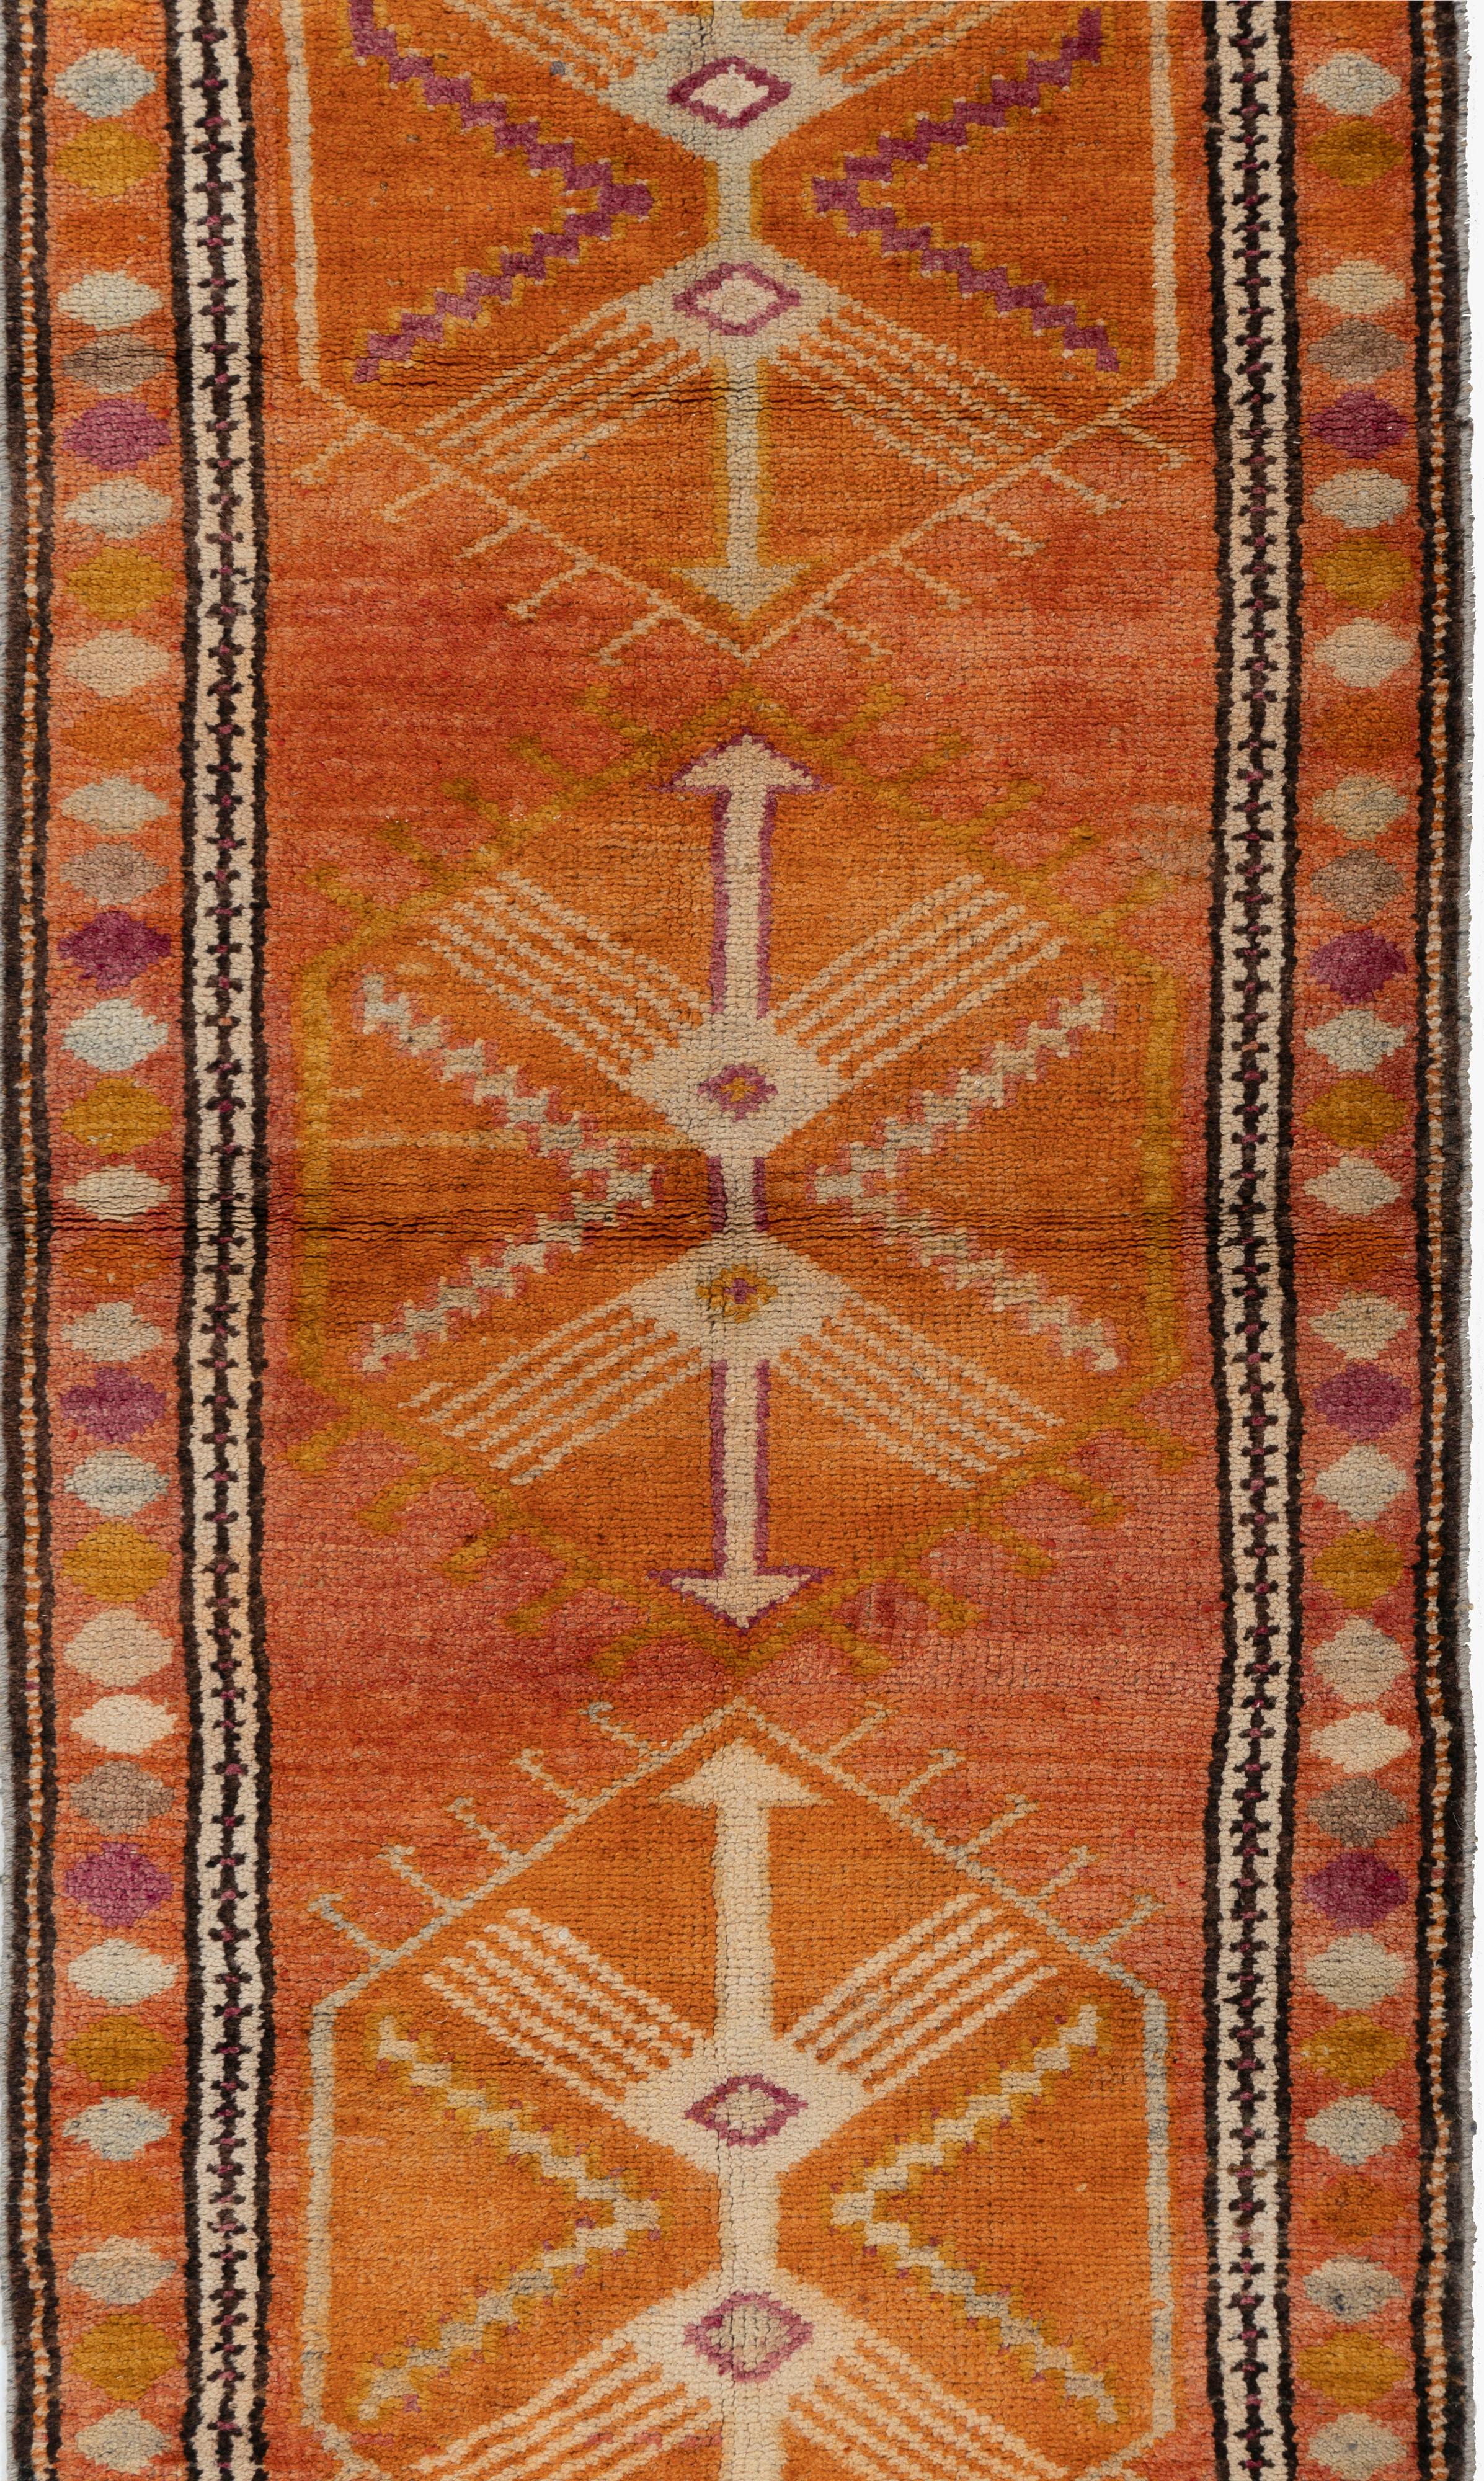 Vintage Turkish Oushak Runner 2'11 x 14'7. The luxurious quality of the wool (for which Oushaks have always been famous) contributed to the vibrancy of the colors. Unlike most Turkish rugs, Oushak rugs were heavily influenced by Persian design. Many